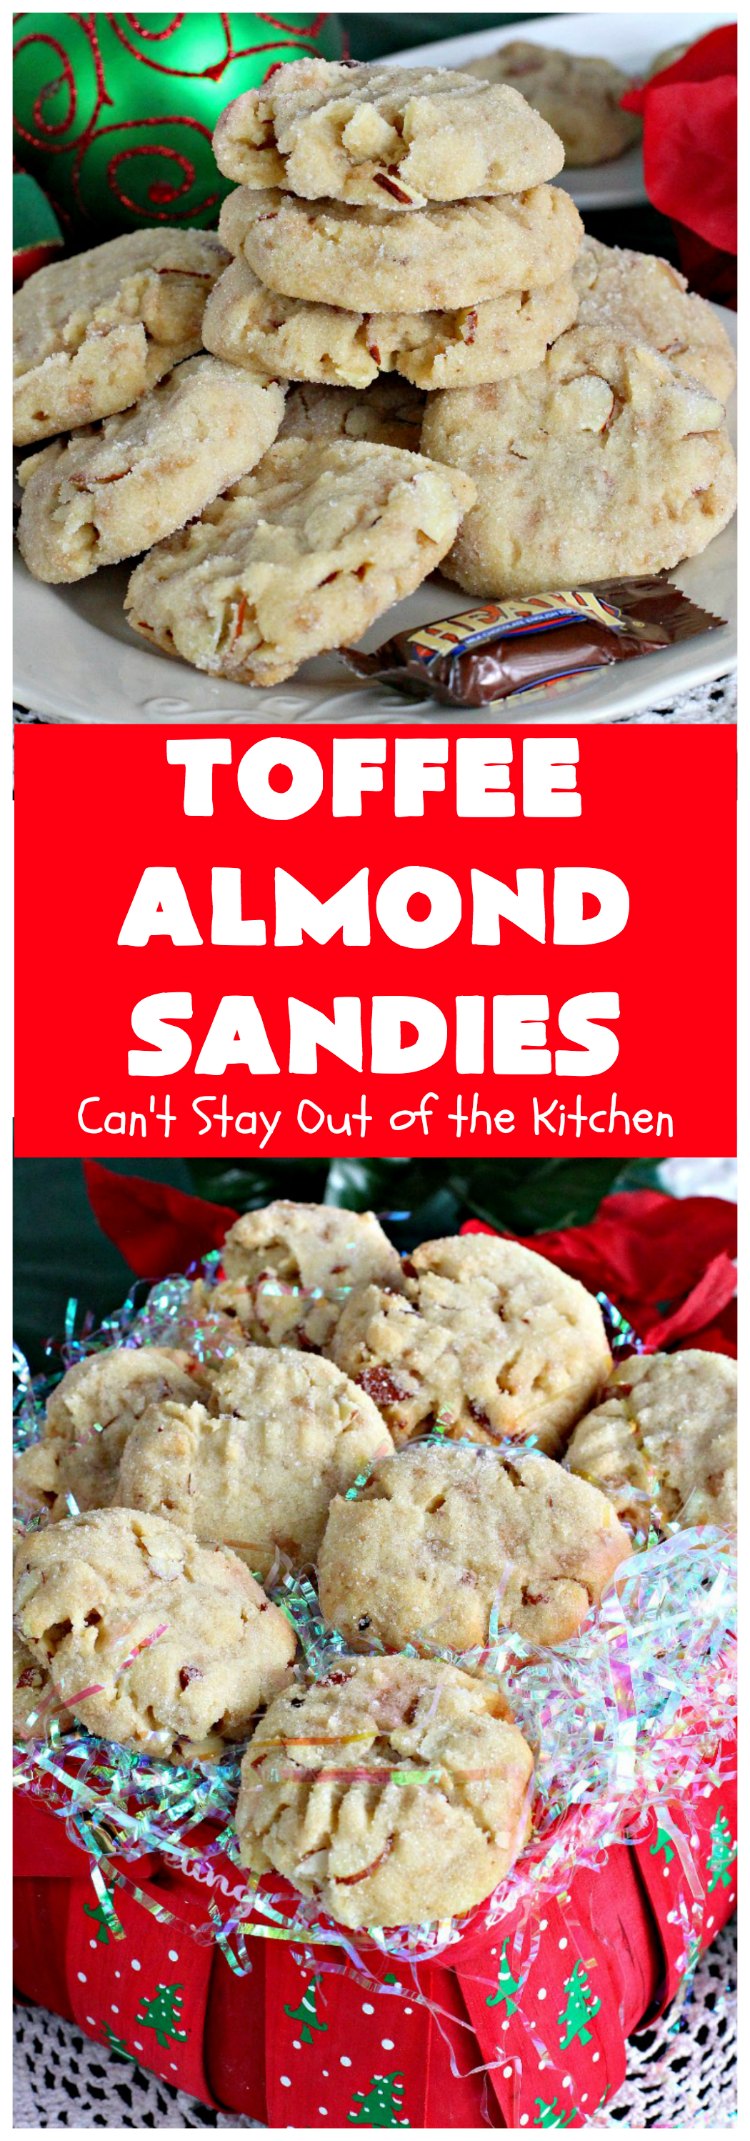 Toffee Almond Sandies | Can't Stay Out of the Kitchen